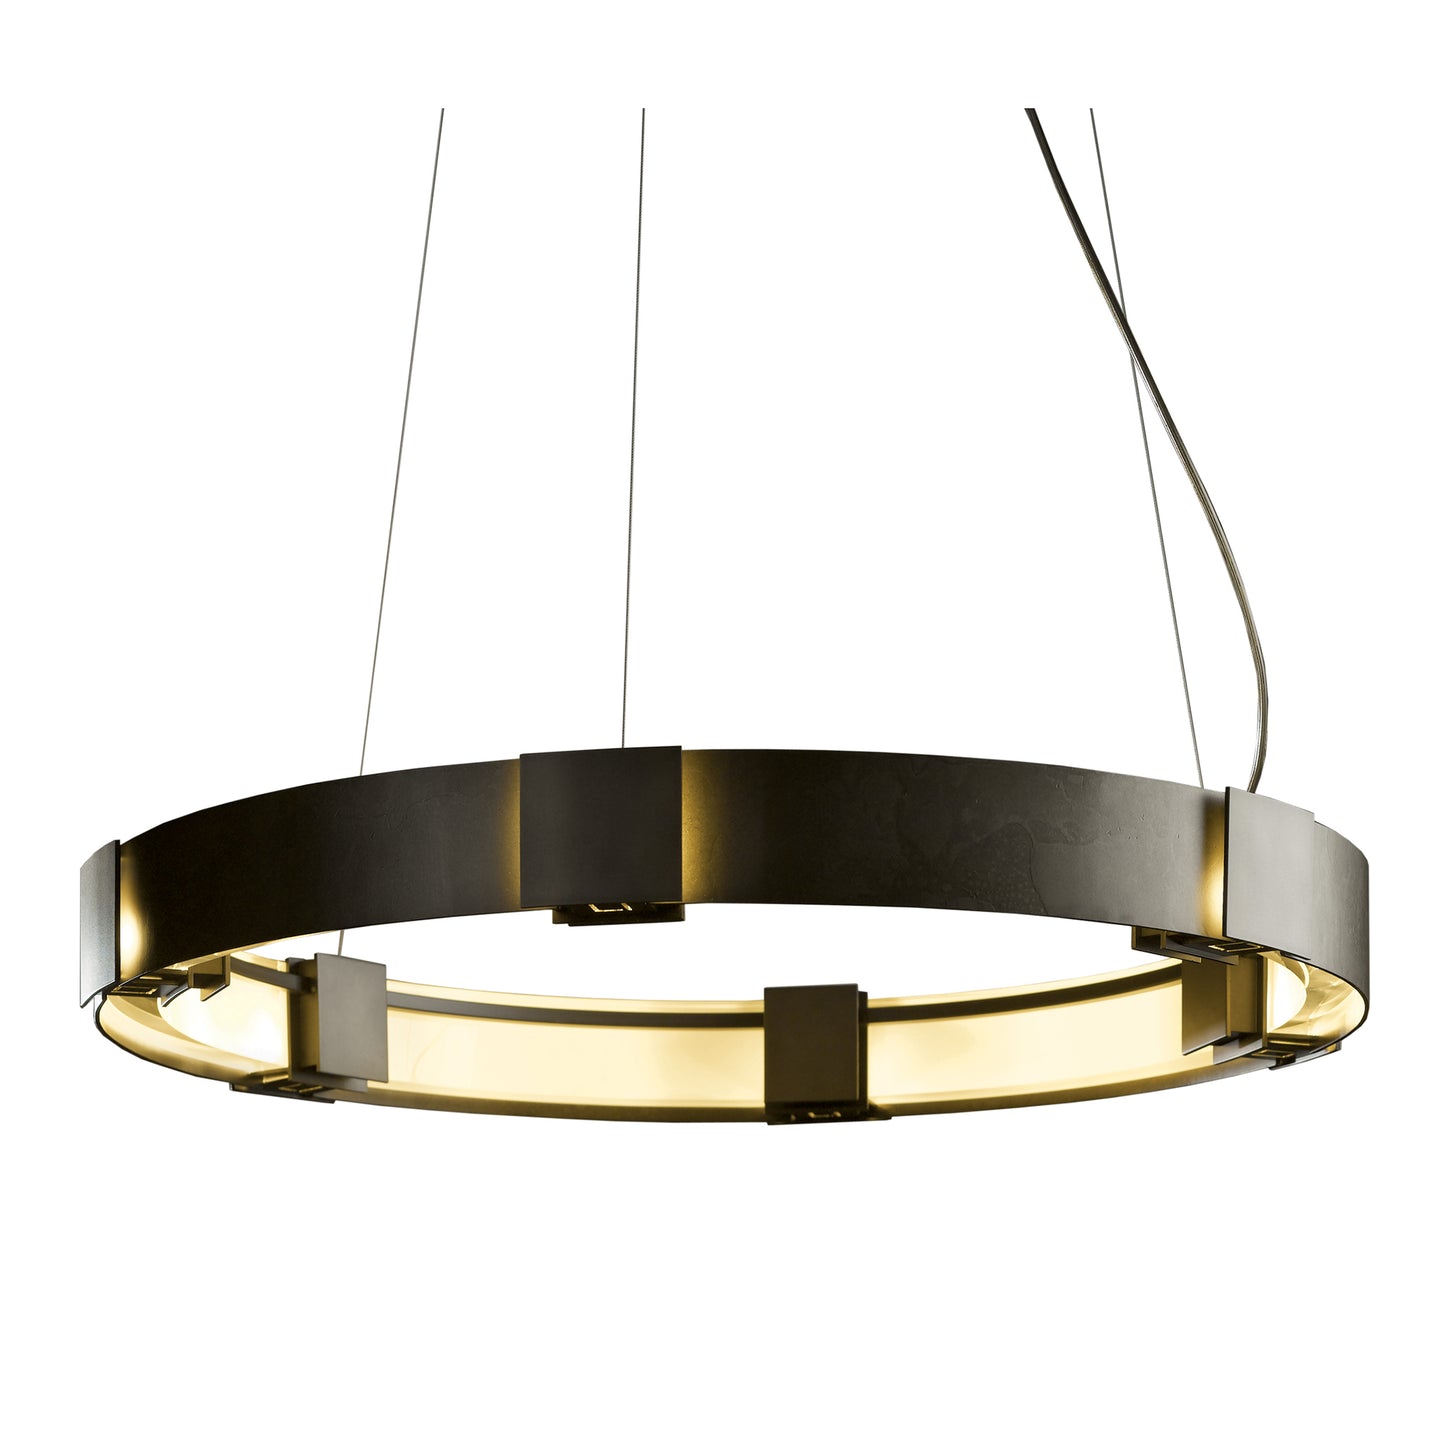 The Hubbardton Forge Aura Pendant is expertly crafted by Vermont artisans, featuring a sleek circular shape.